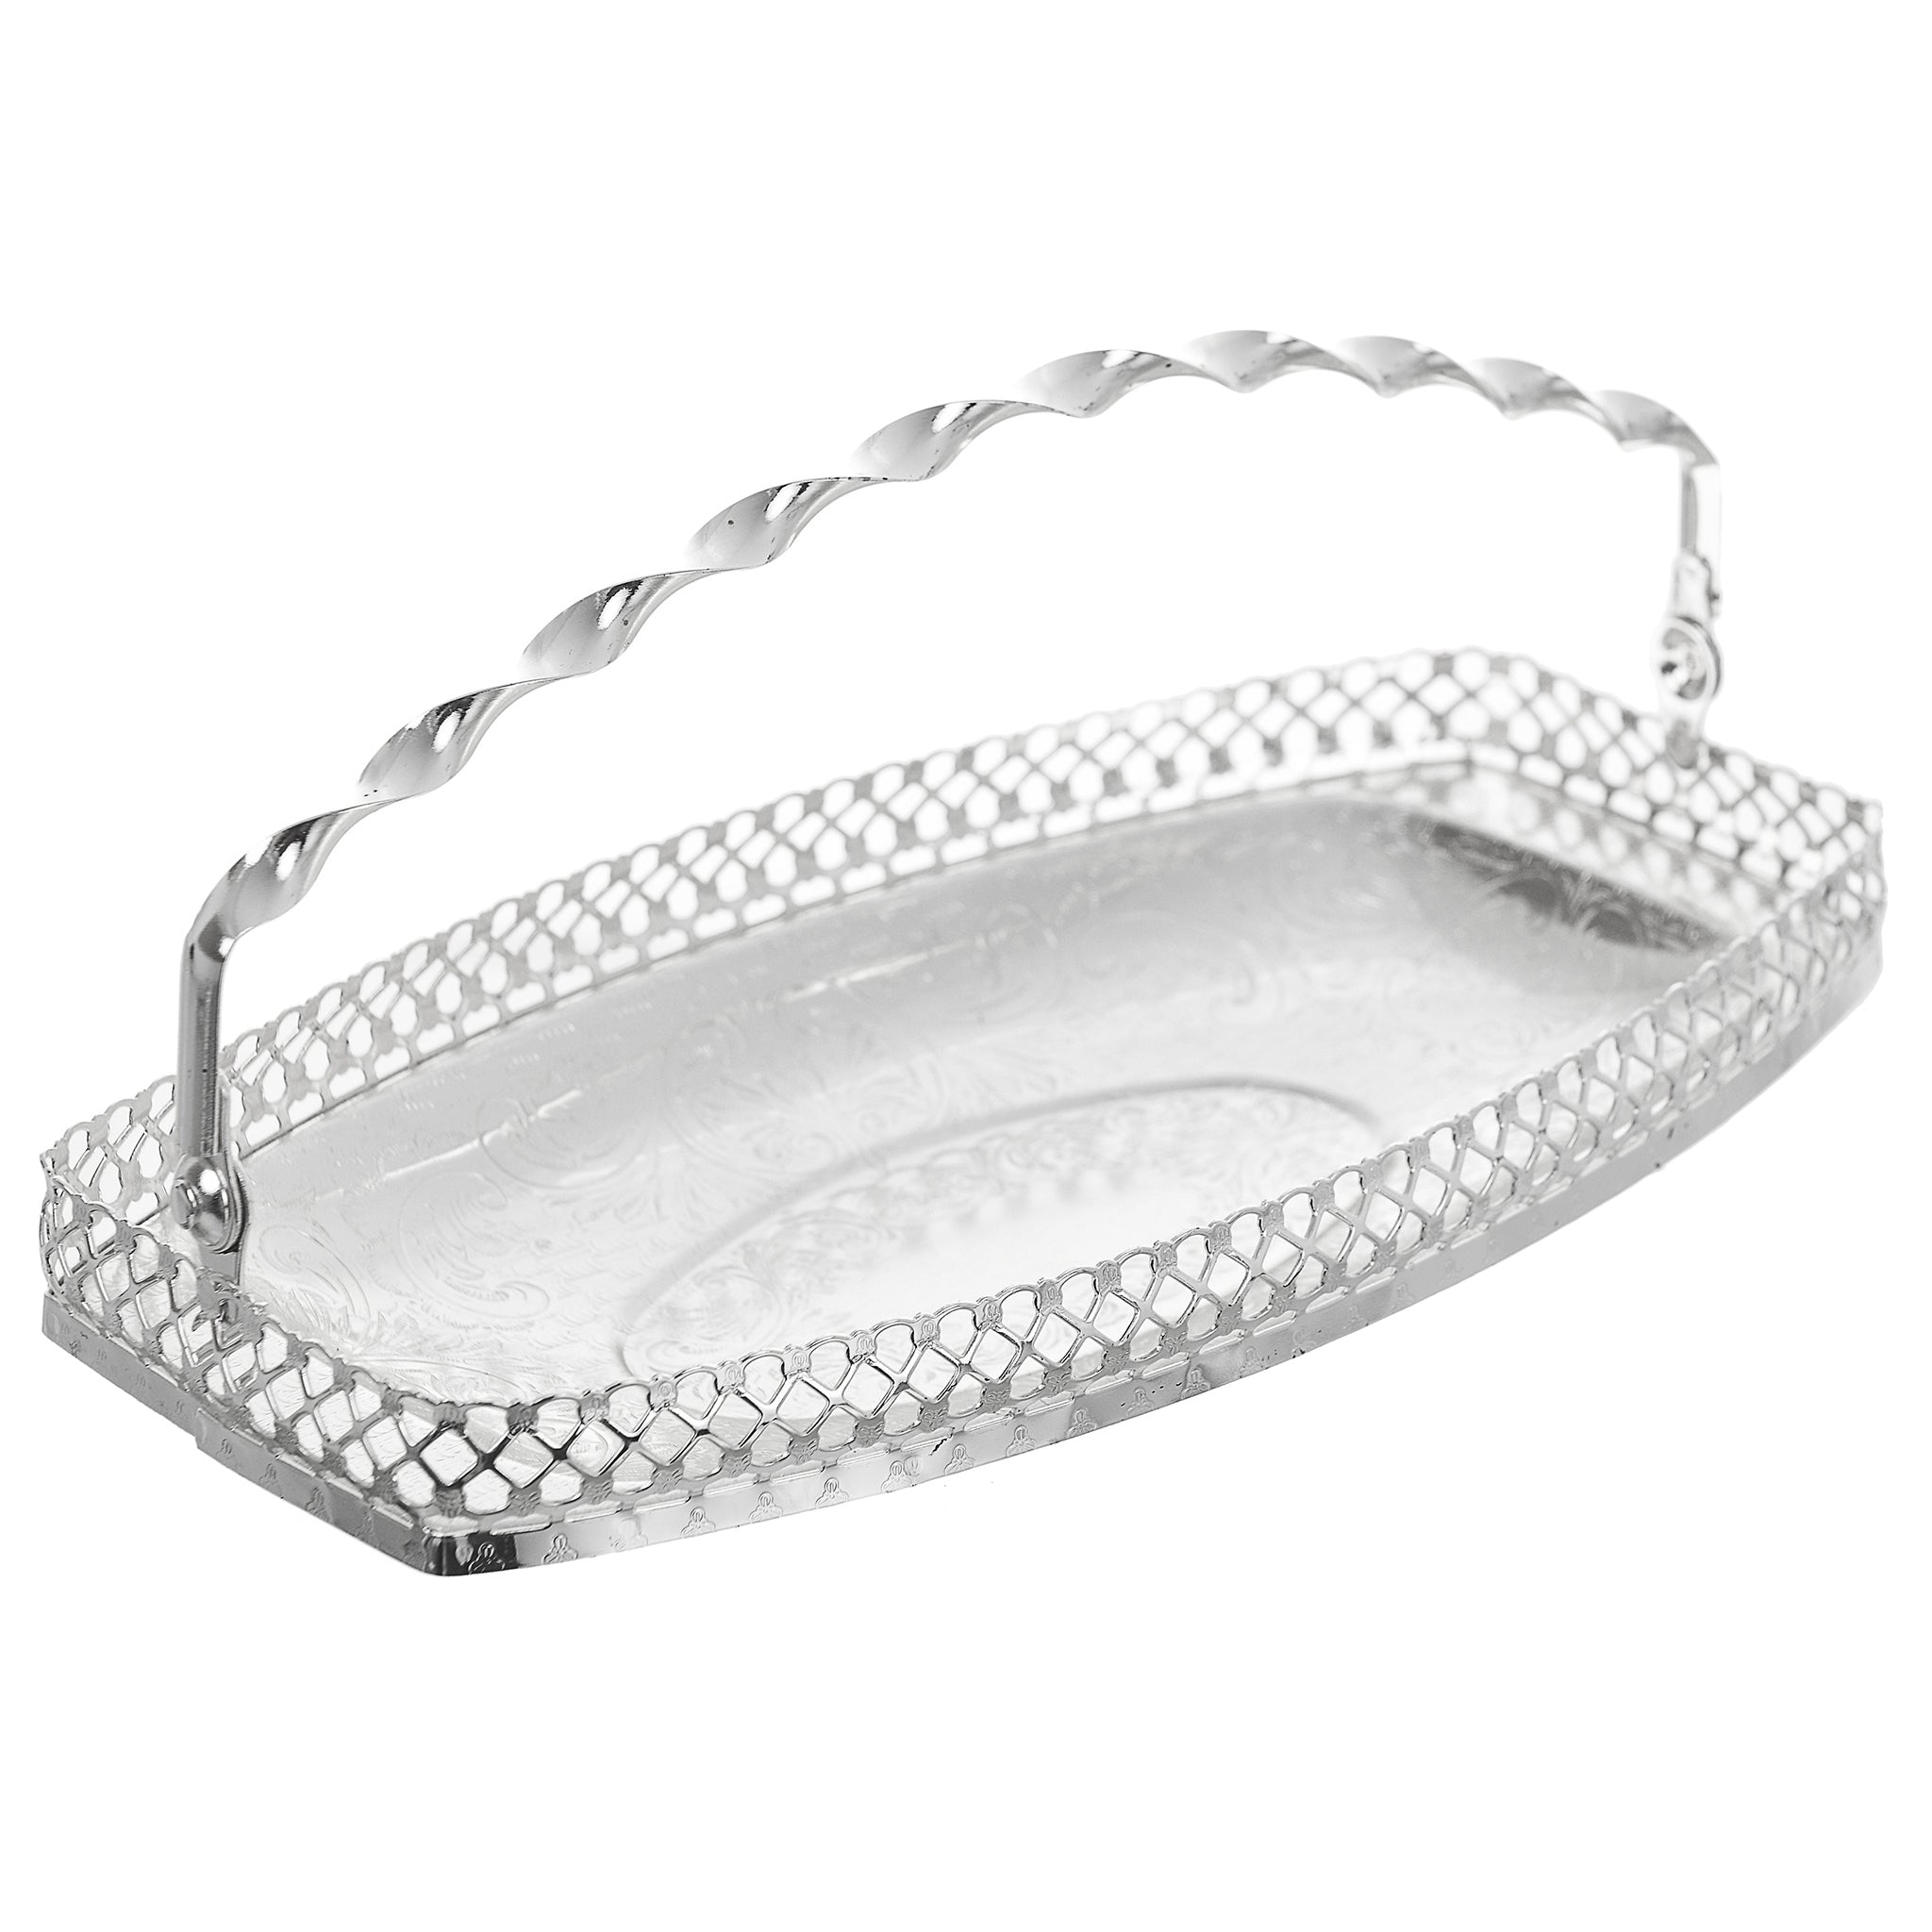 Queen Anne - Cookies Tray with Swing Handle - Silver Plated Metal - 24x13cm - 26000258